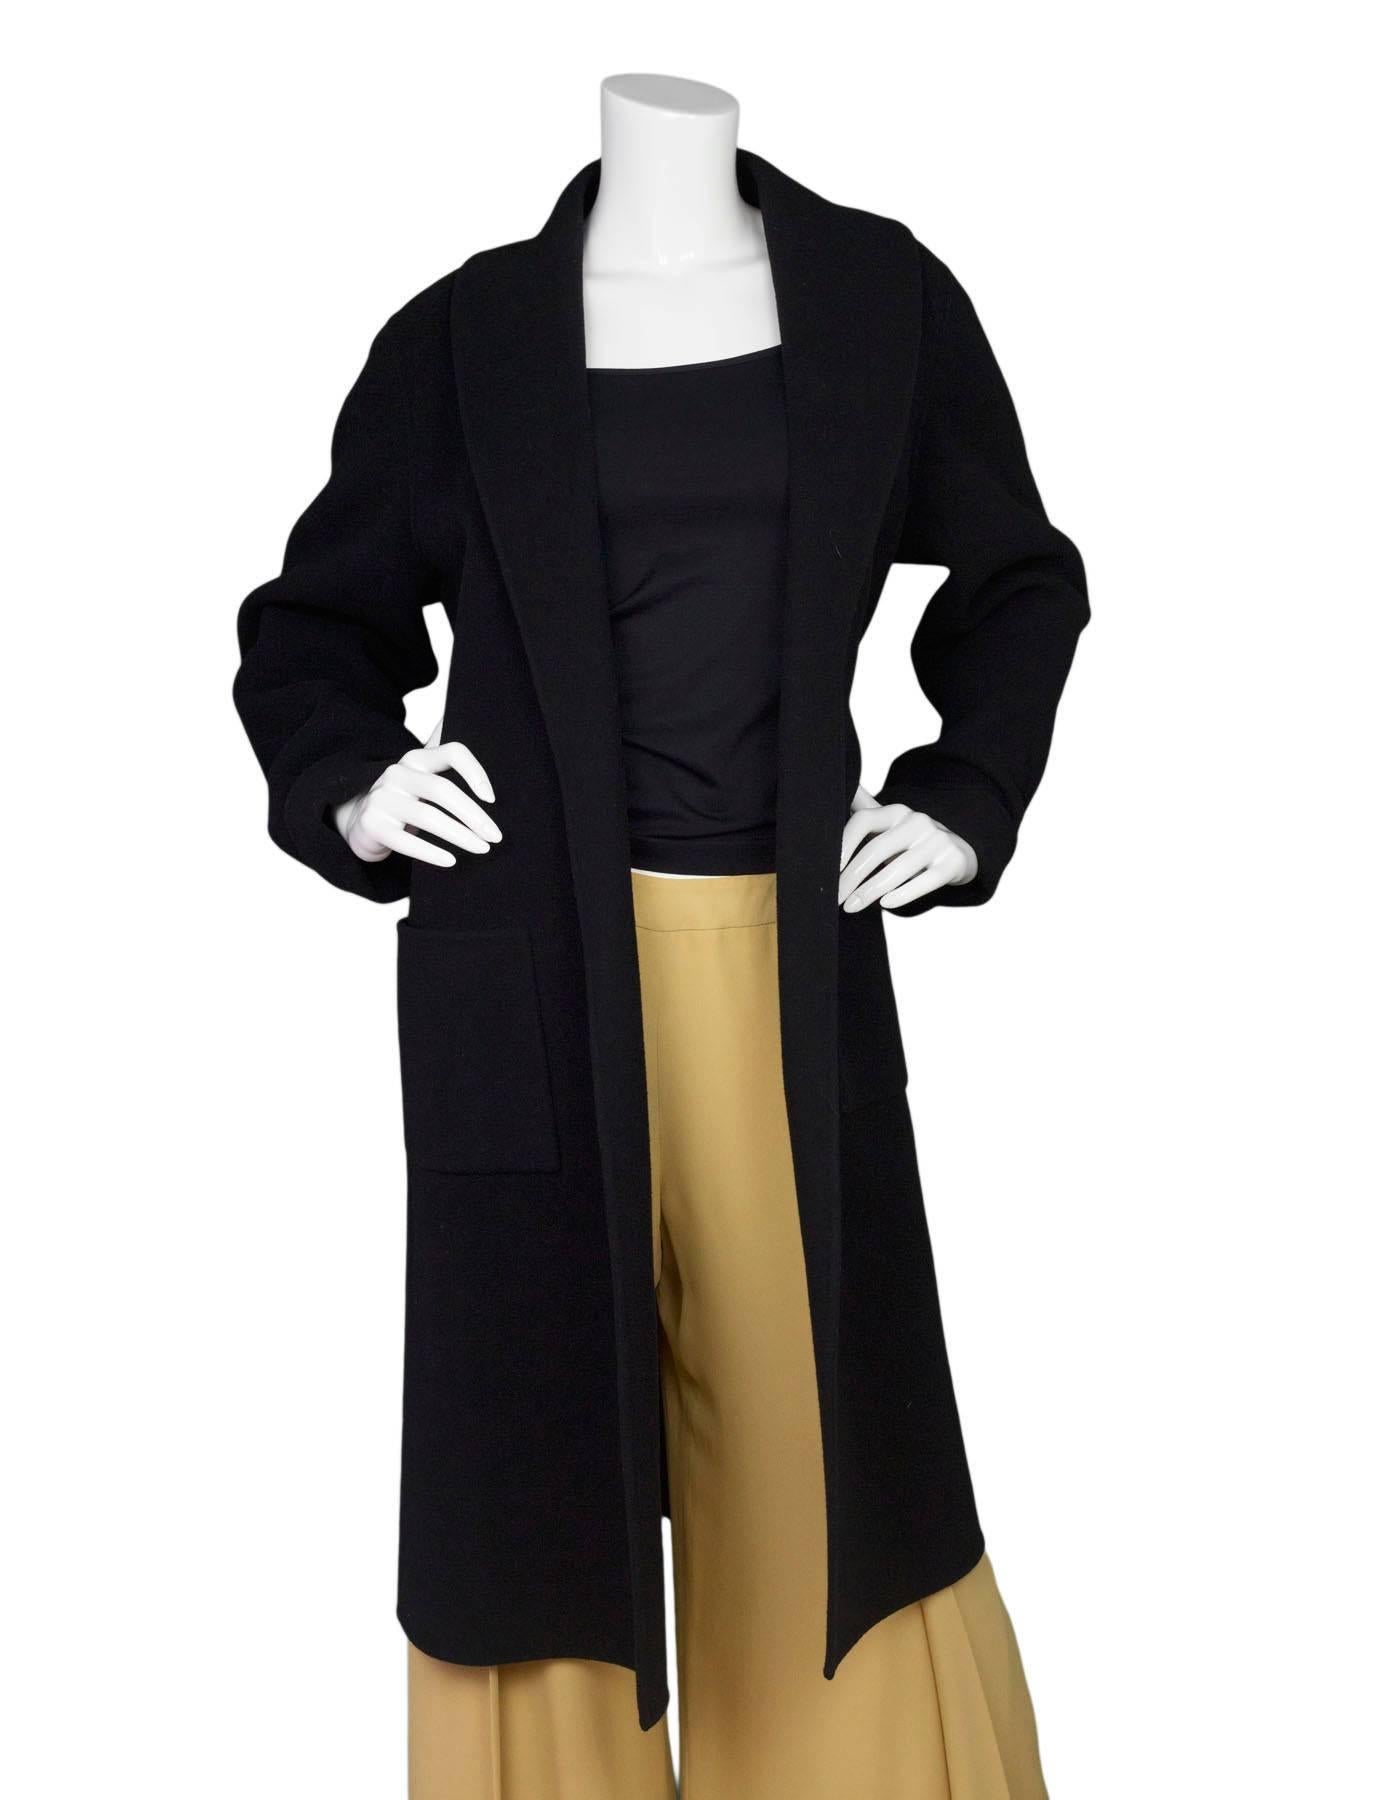 Eileen Fisher Black Draped Coat Sz L

Made In: China
Color: Black
Materials: not listed, feels like cashmere/wool blend
Lining: None
Closure/Opening: None
Exterior Pockets: Front hip pockets
Interior Pockets: None
Overall Condition: Excellent